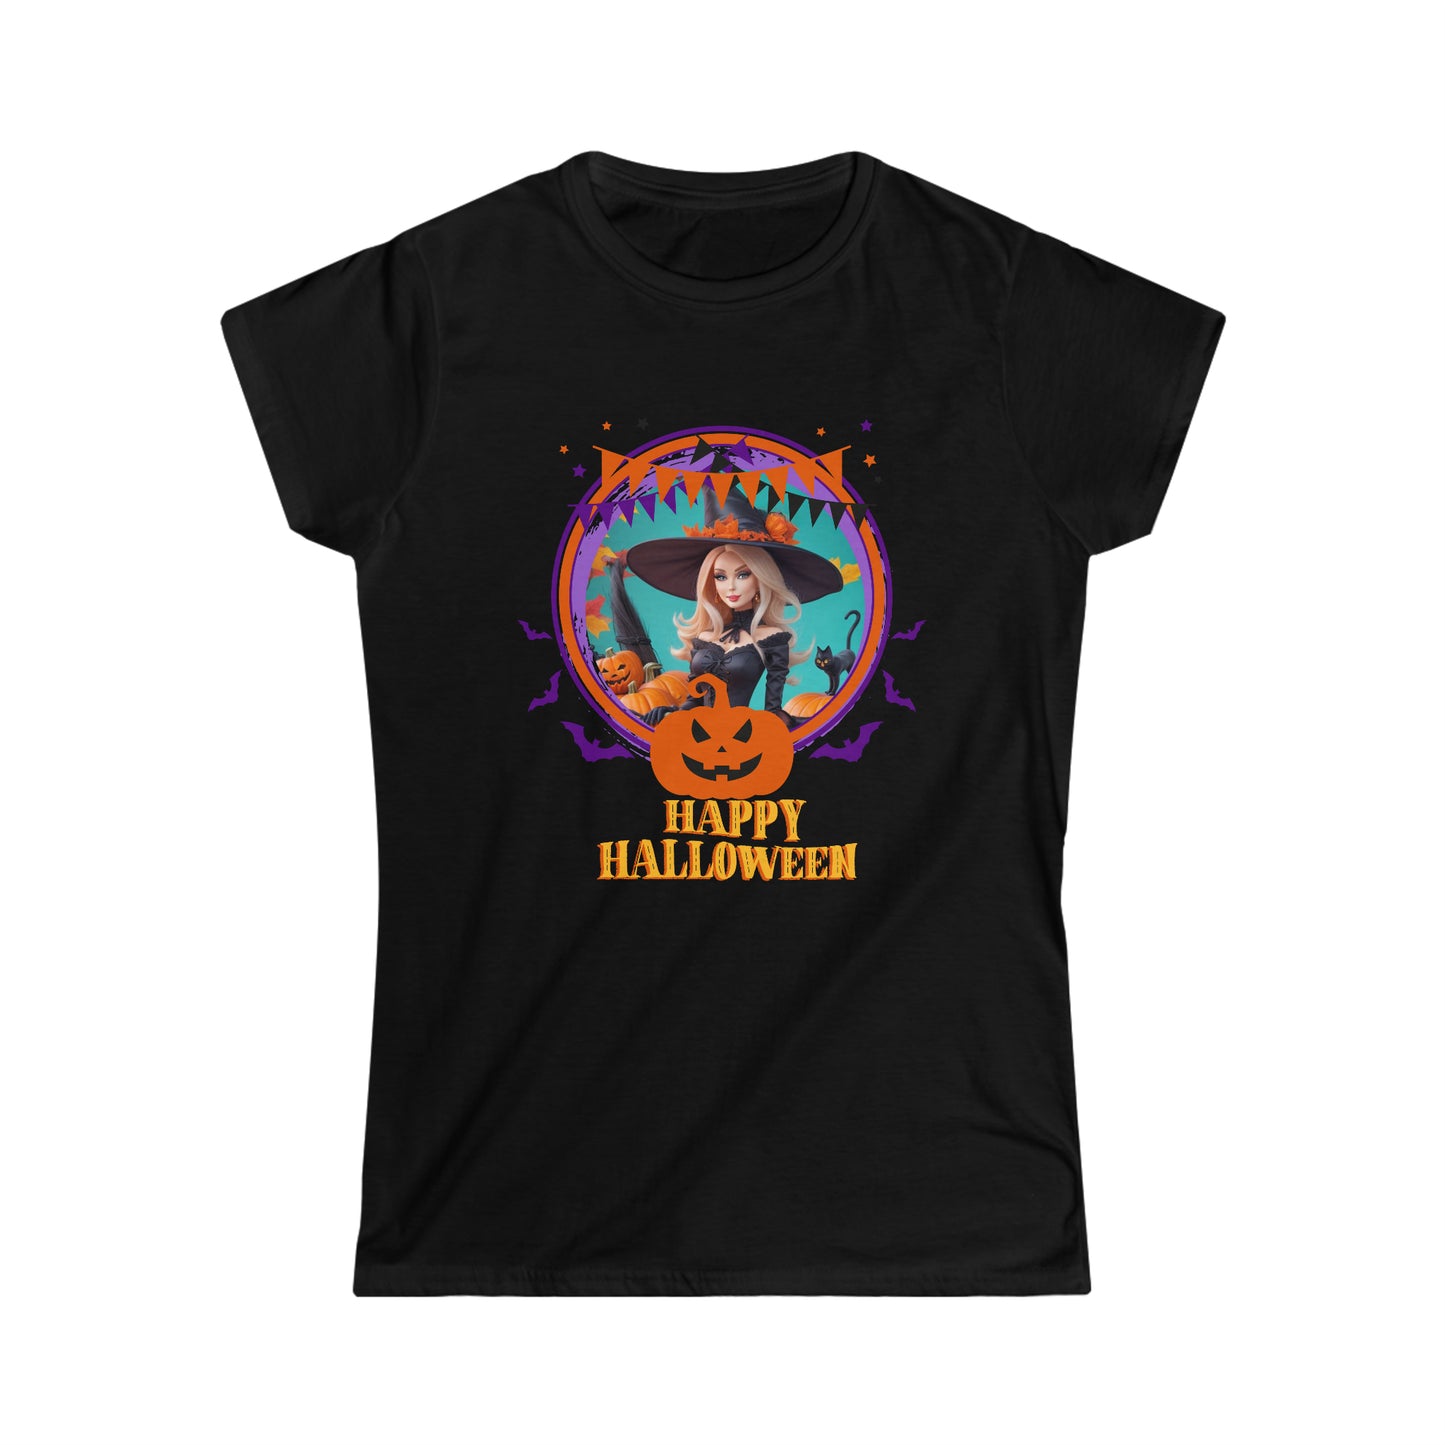 Women's Softstyle Tee - Halloween - Barbie witch - 01